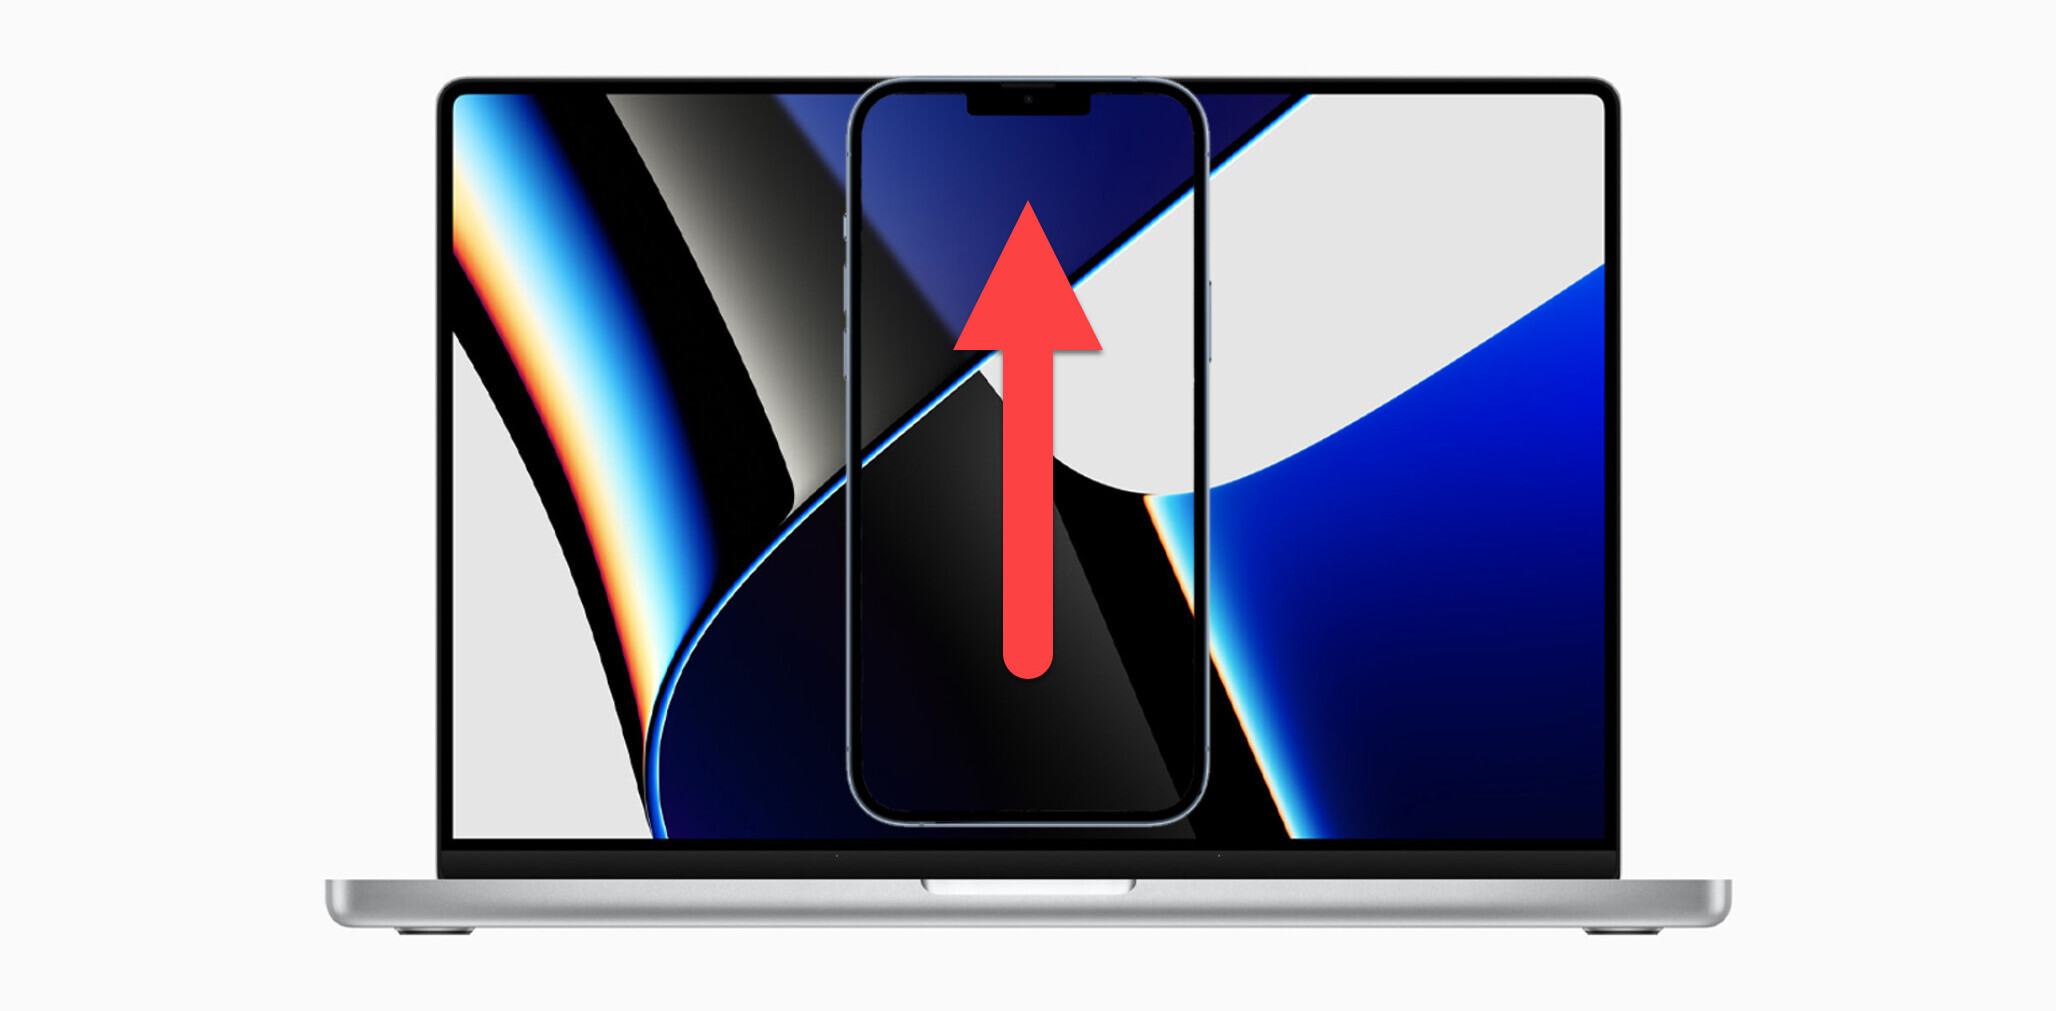 Sorry Apple fans: The notch is here to stay